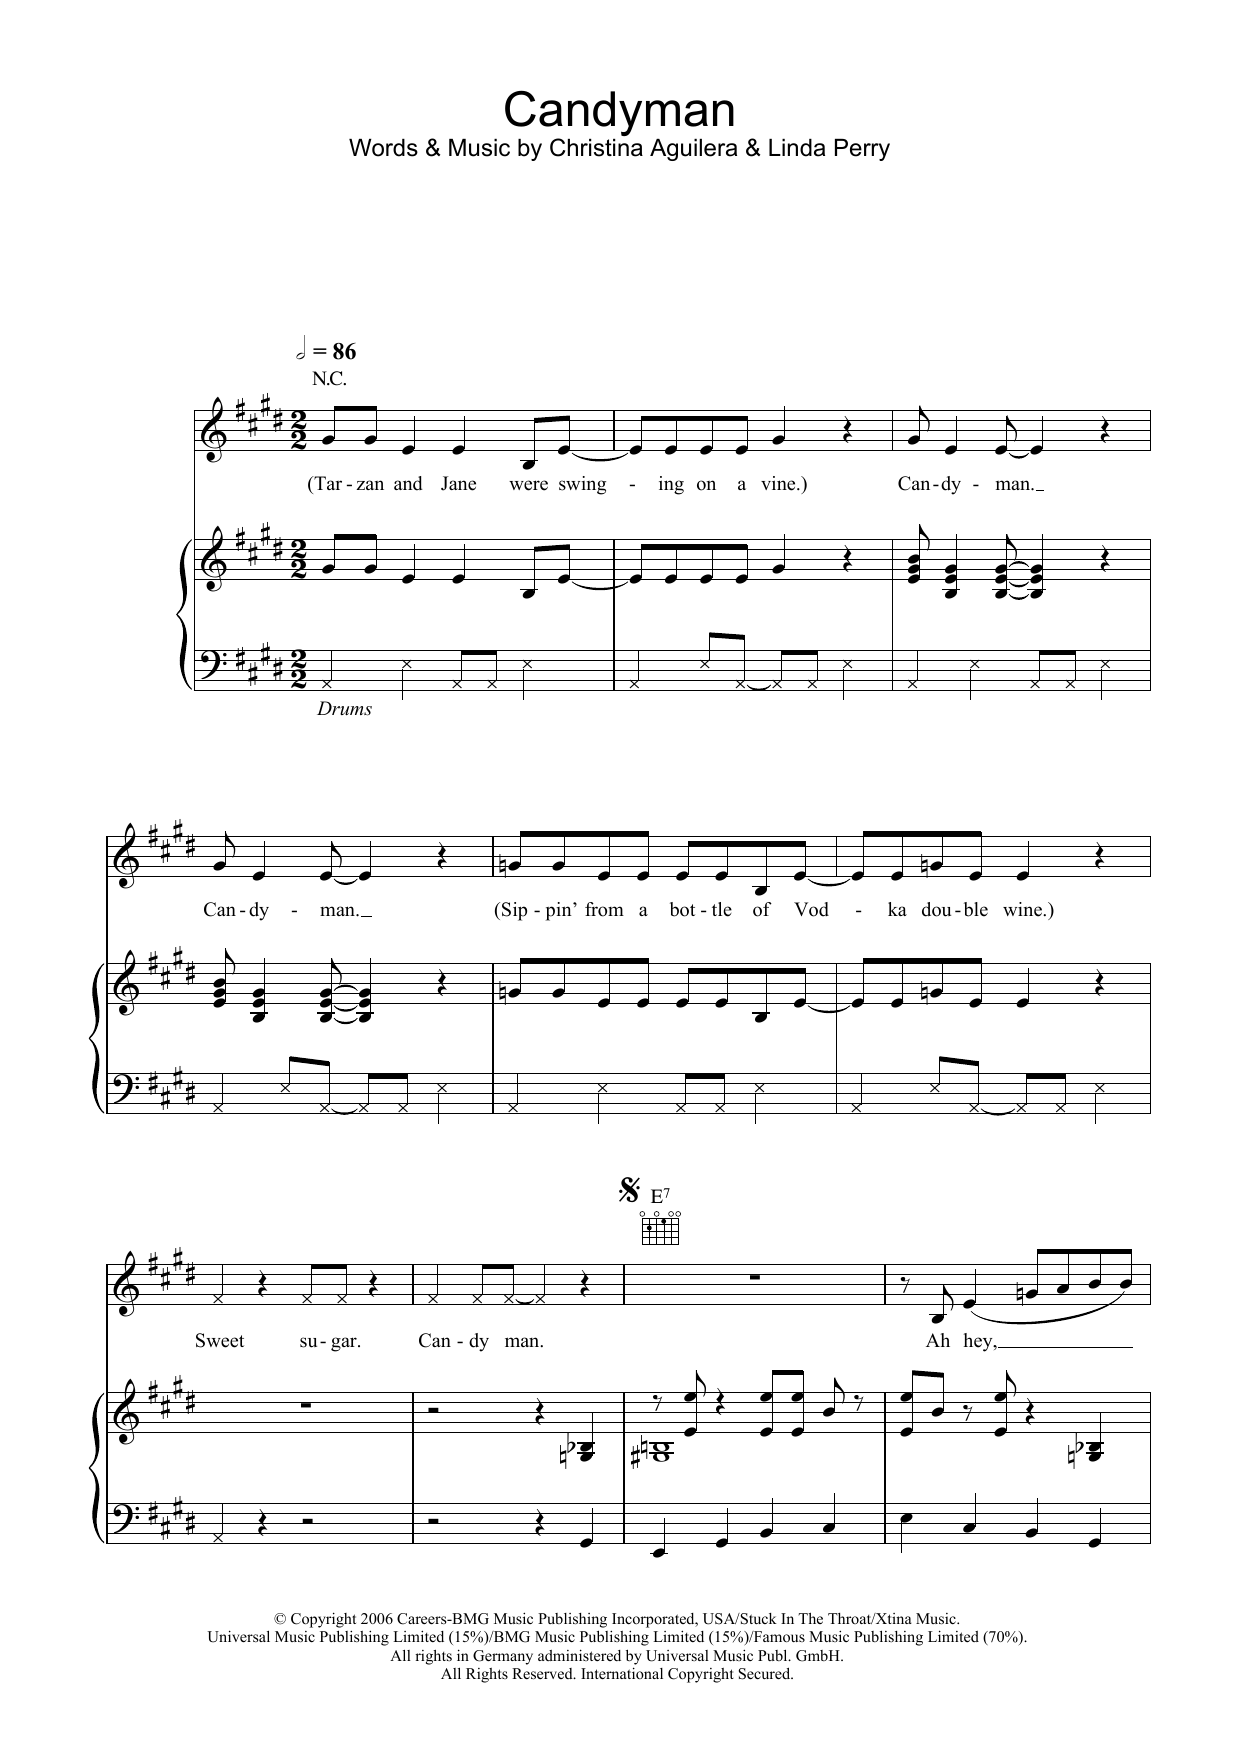 Candyman Sheet Music By Christina Aguilera For Piano Keyboard And Voice Noteflight Marketplace